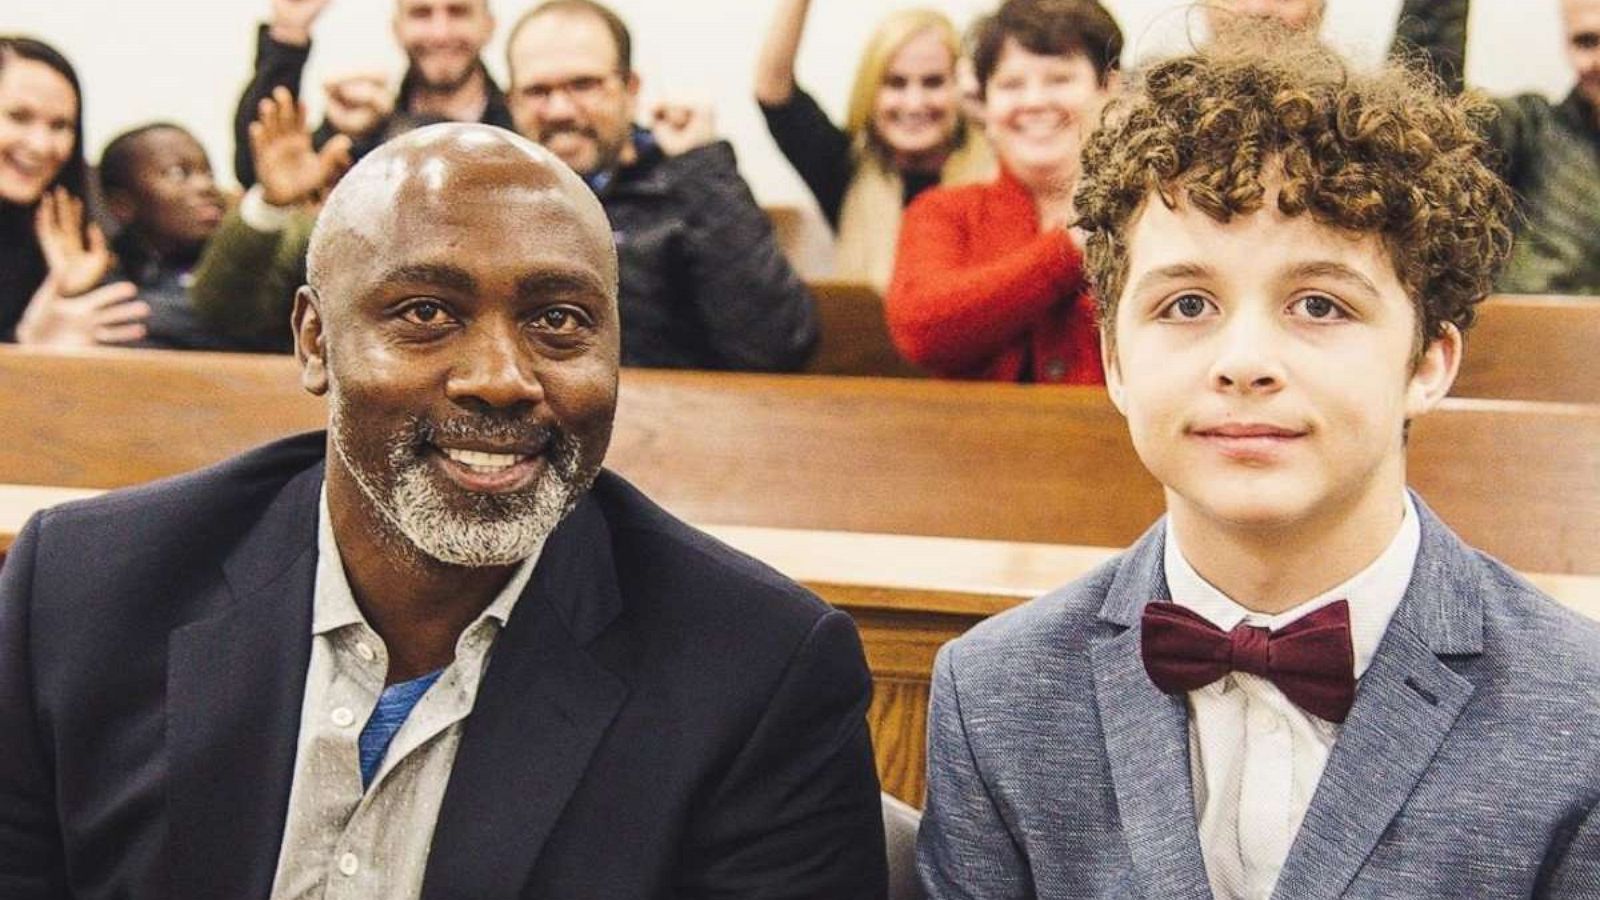 Single dad adopts 13-year-old who was abandoned 2 years earlier at hospital  - Good Morning America